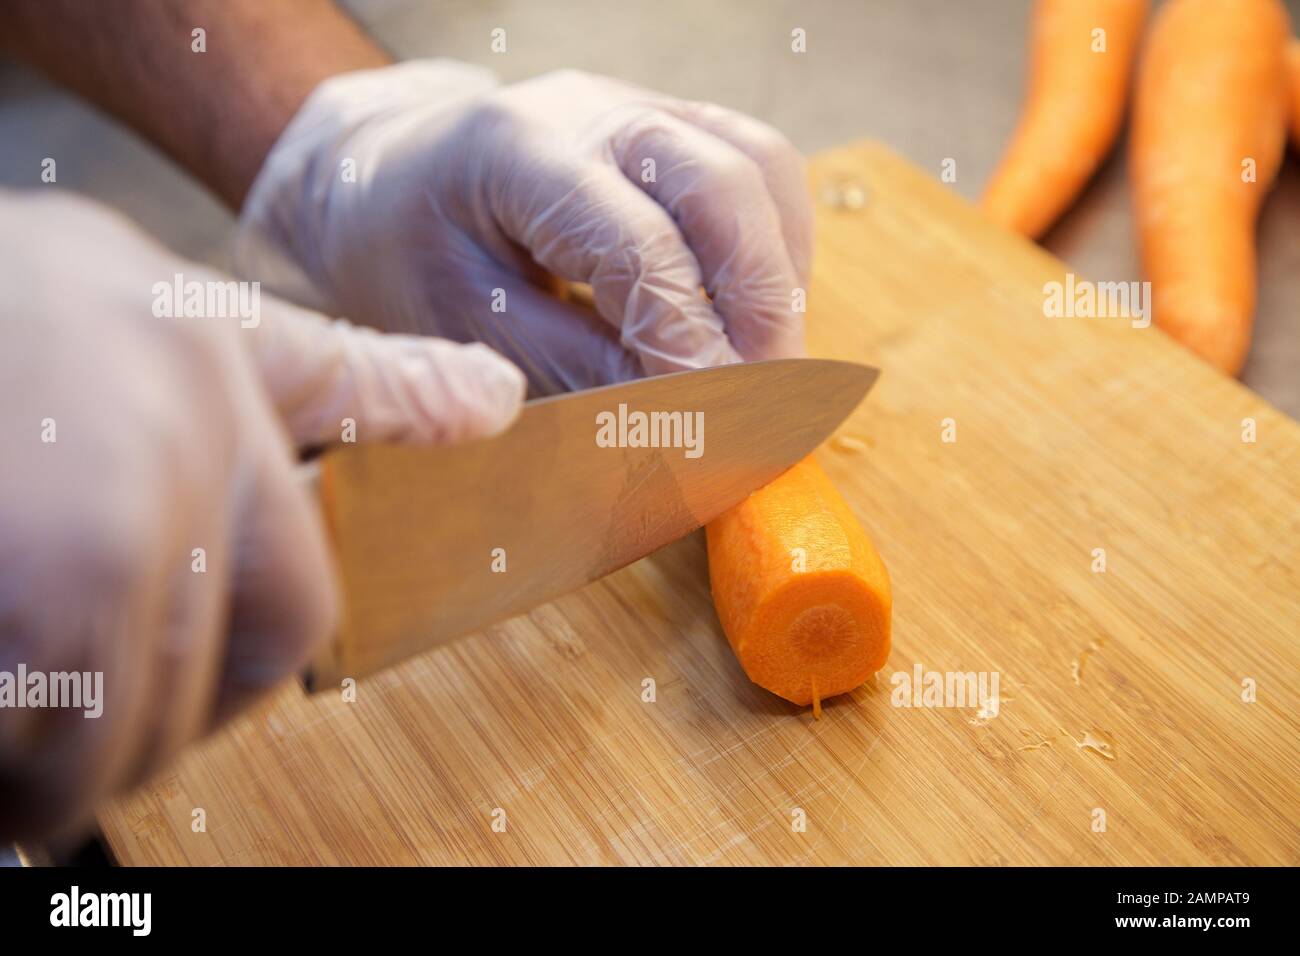 Close up shot of a chef chopping carrots on a wooden chopping board. Stock Photo